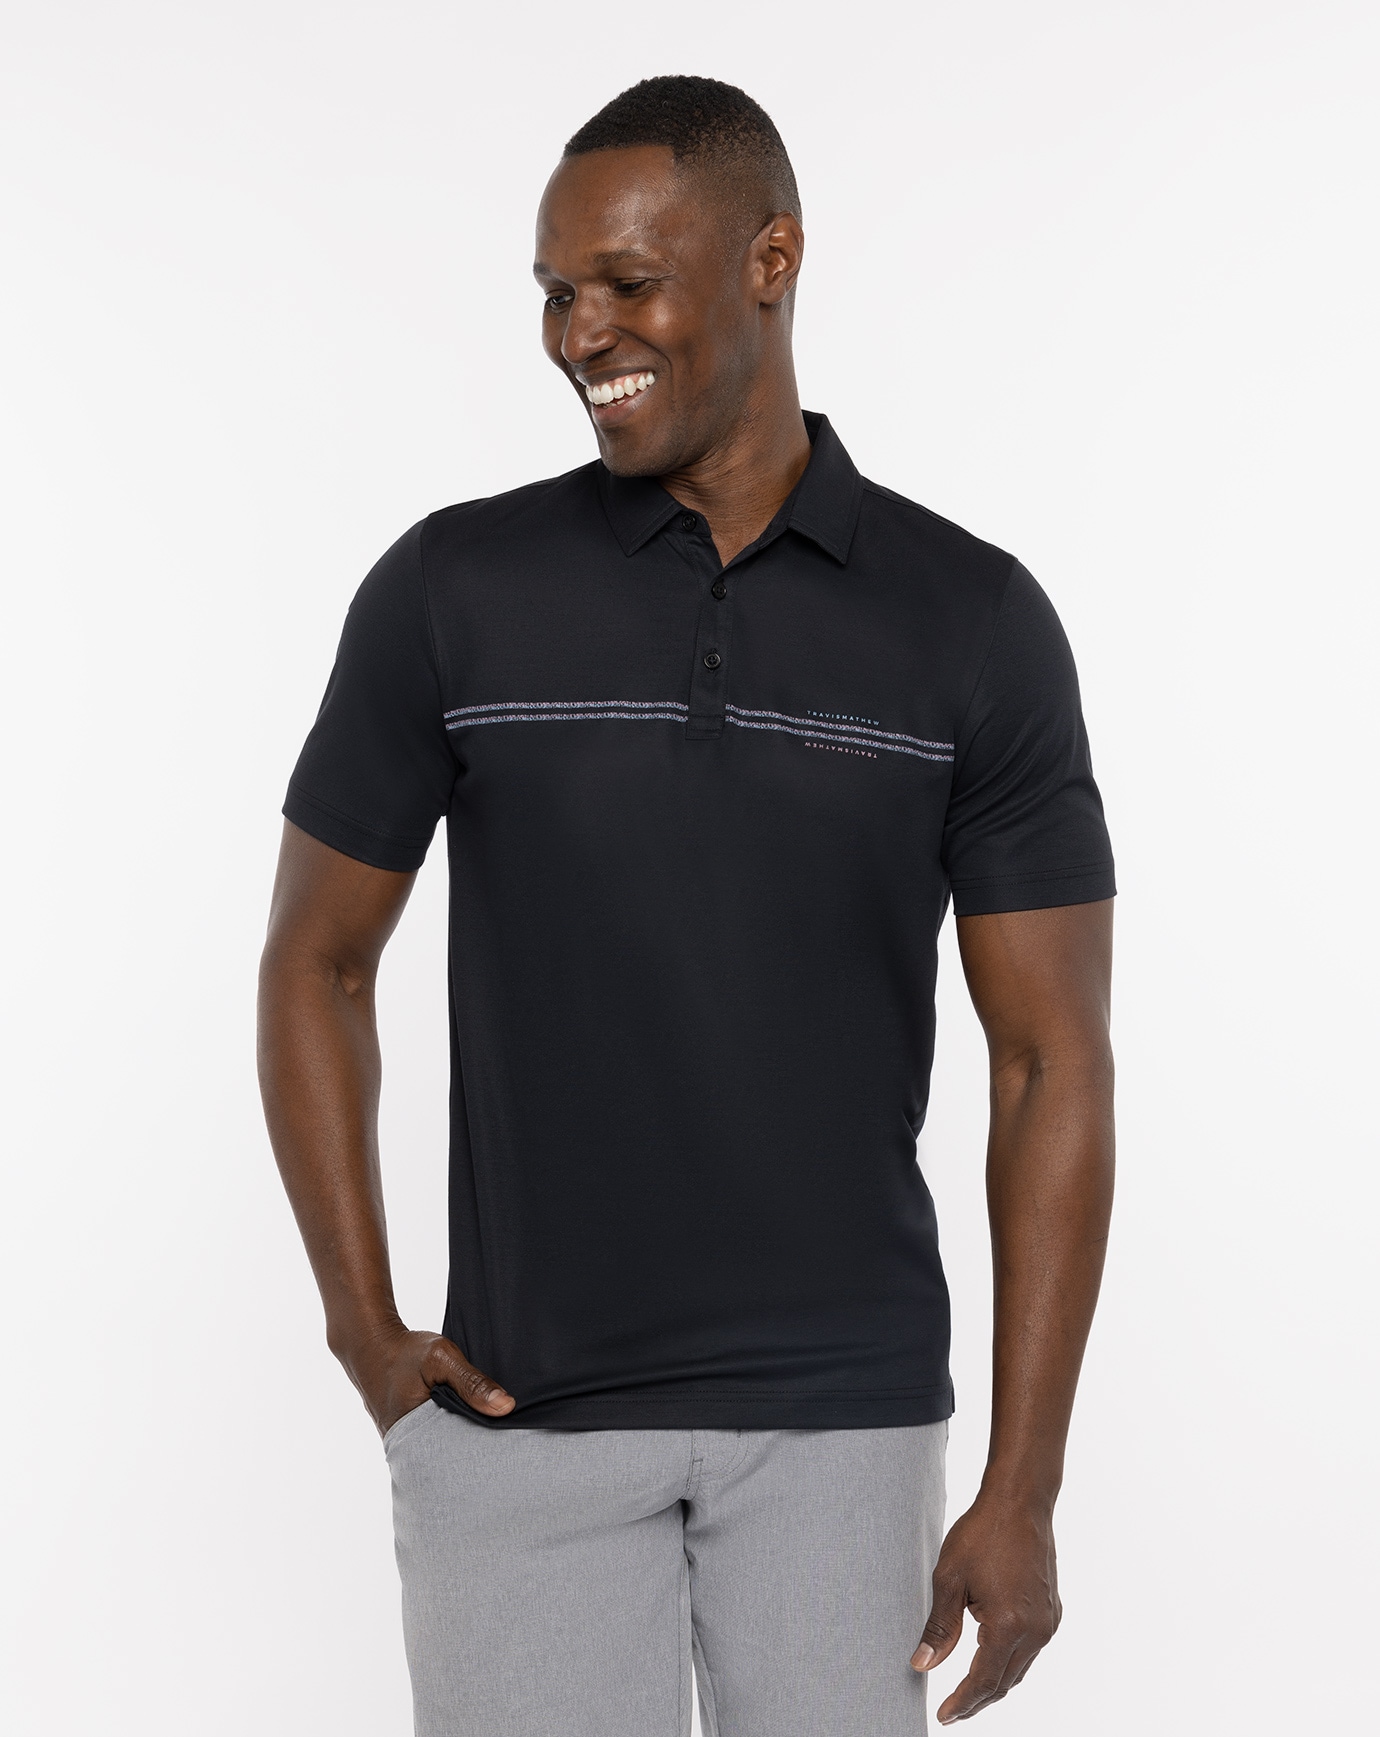 Related Product - ISLAND HISTORY POLO